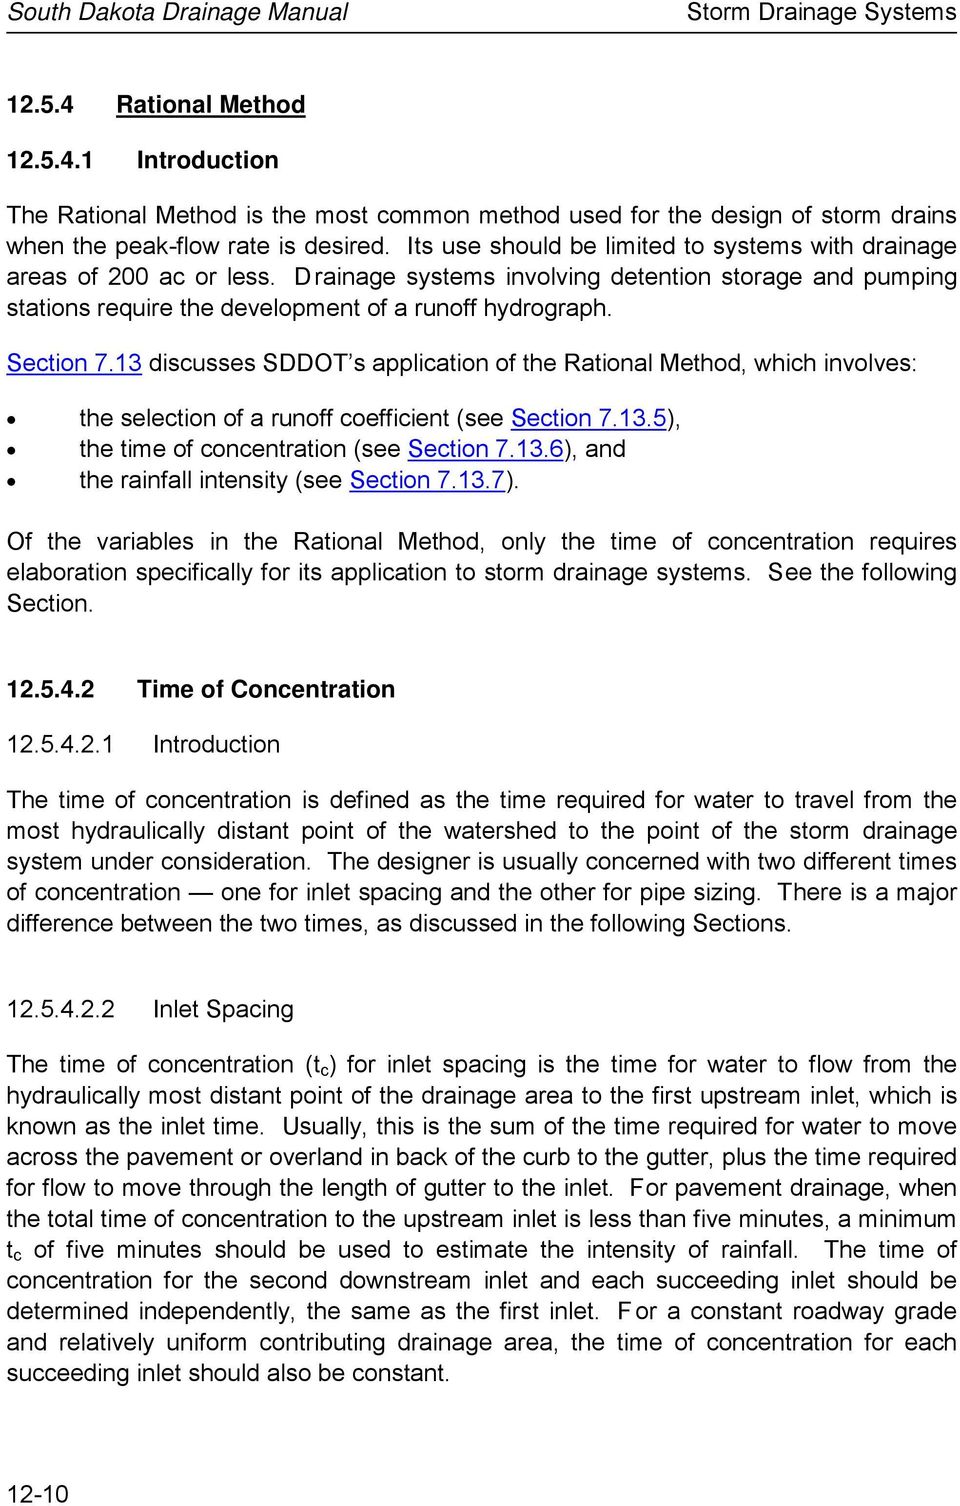 Section 7.13 discusses SDDOT s application of the Rational Method, which involves: the selection of a runoff coefficient (see Section 7.13.5), the time of concentration (see Section 7.13.6), and the rainfall intensity (see Section 7.